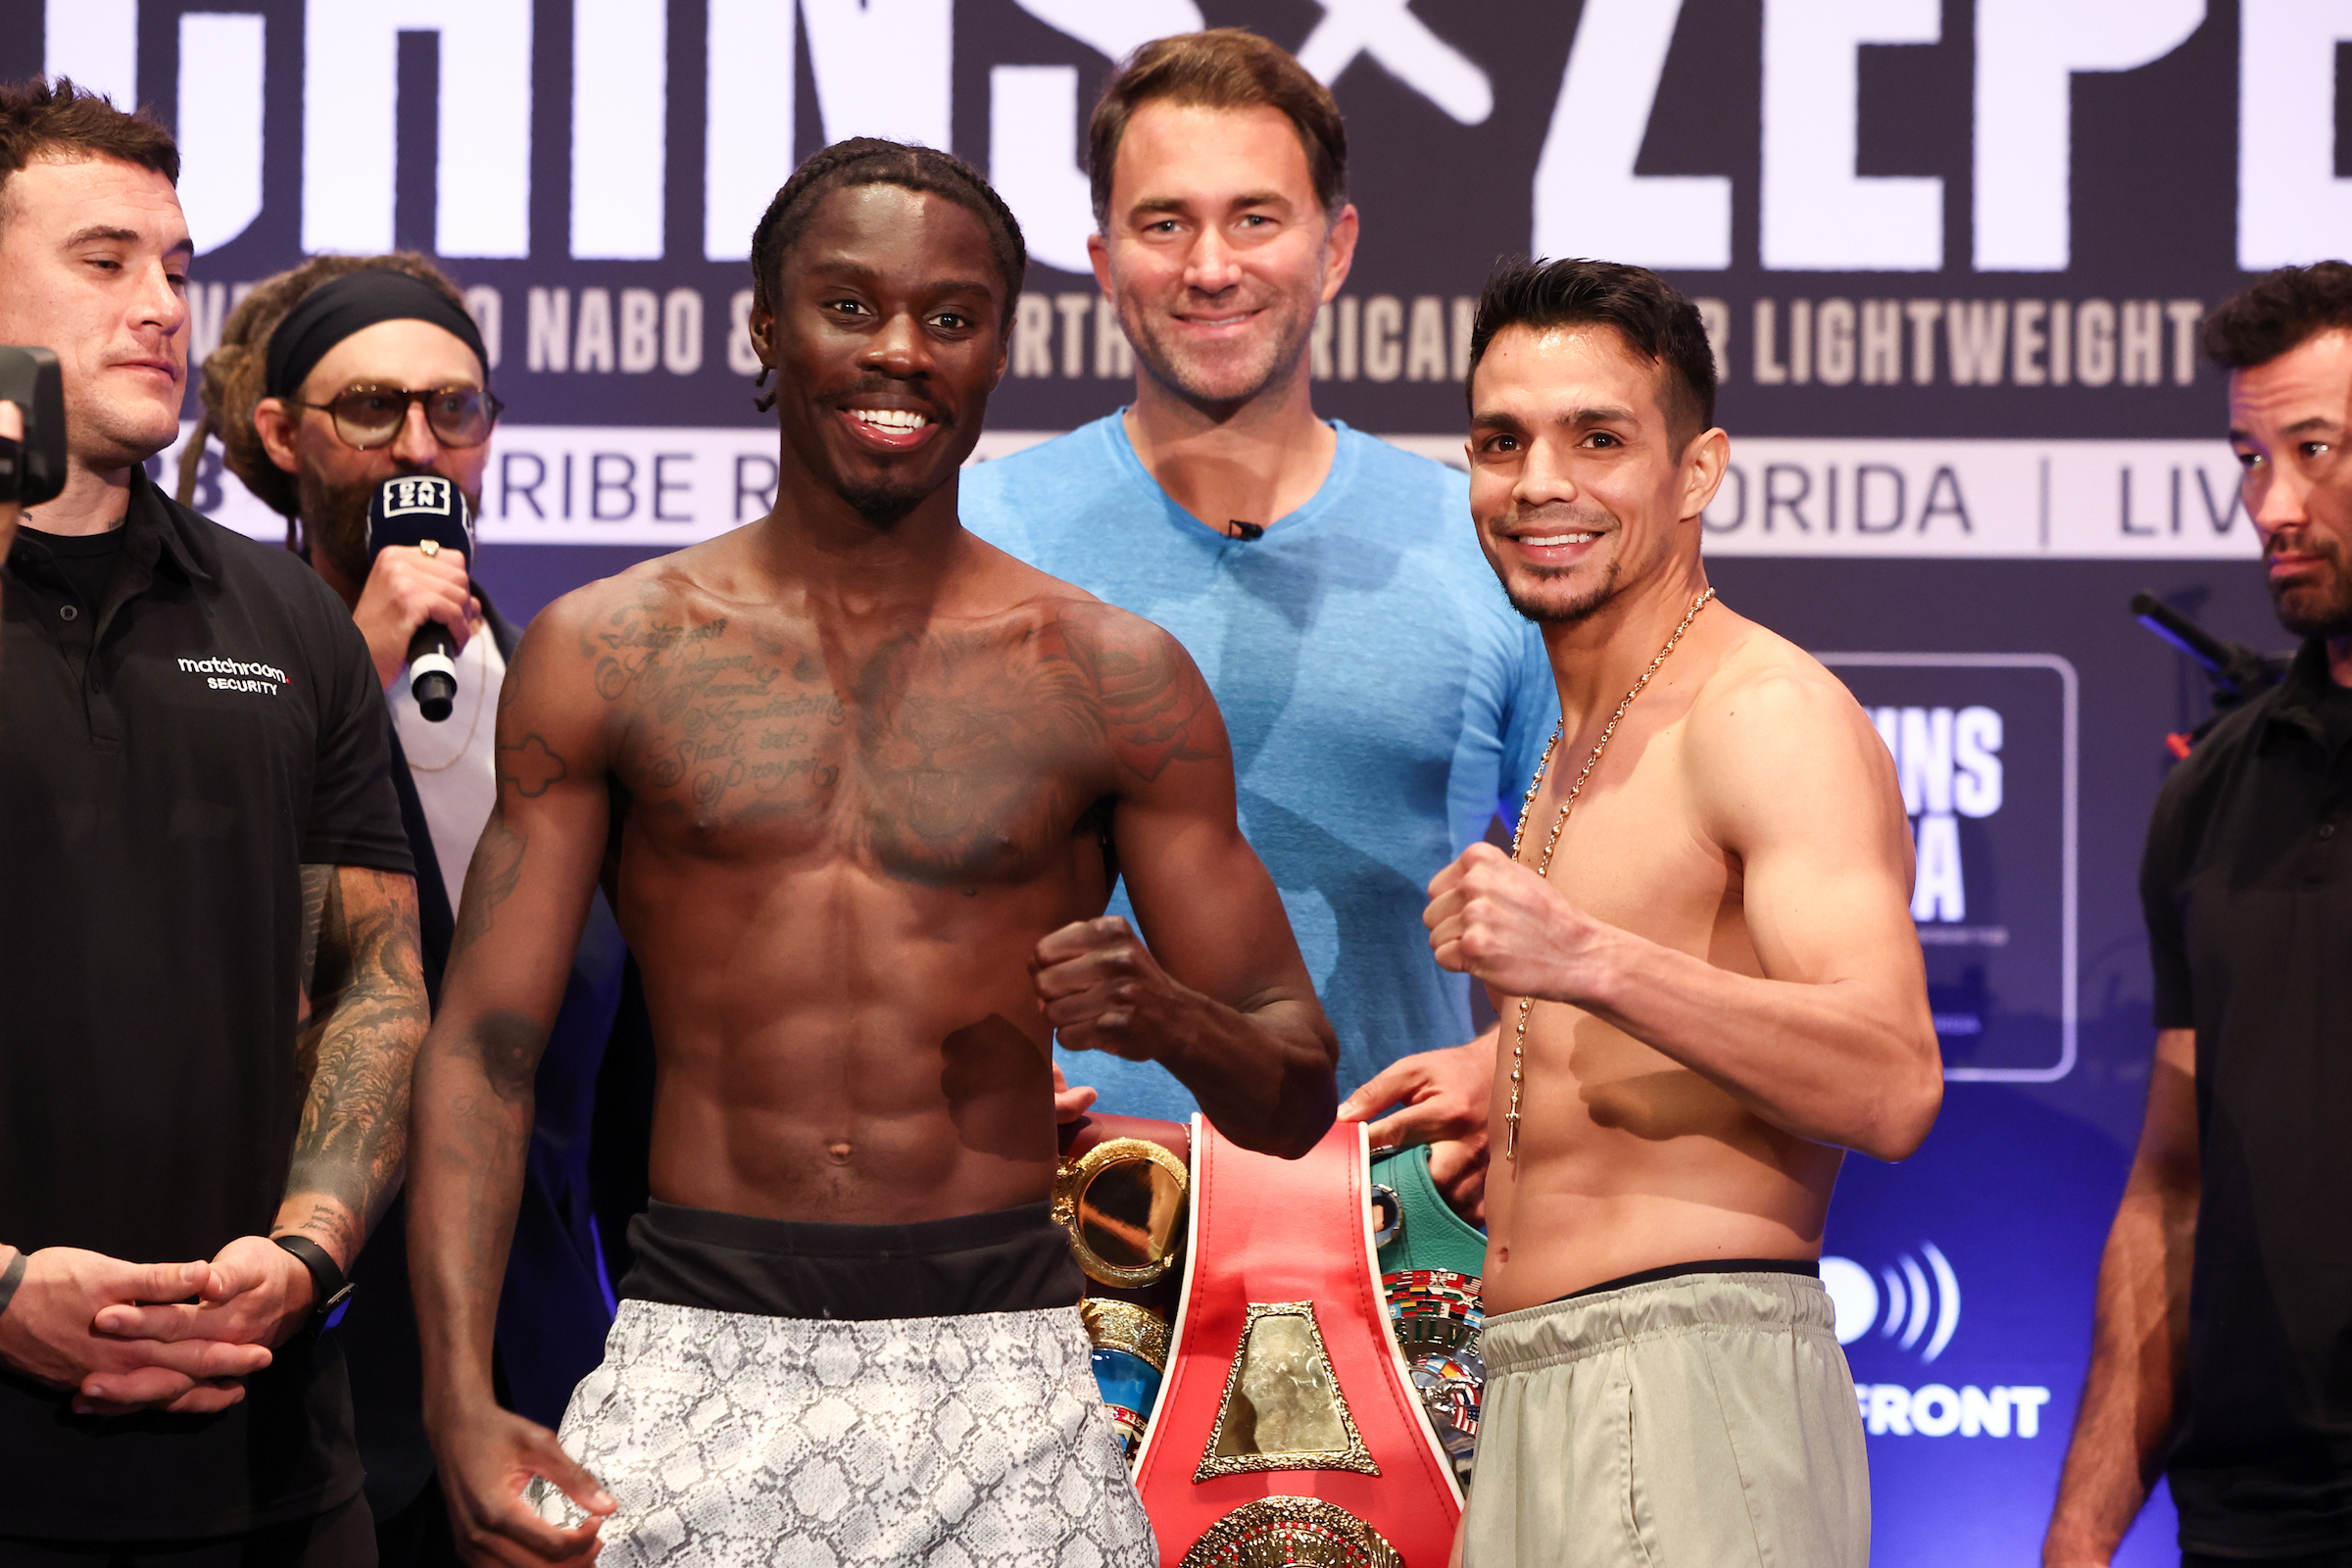 Hitchins vs. Zepeda: Weigh-In Results & Betting Odds